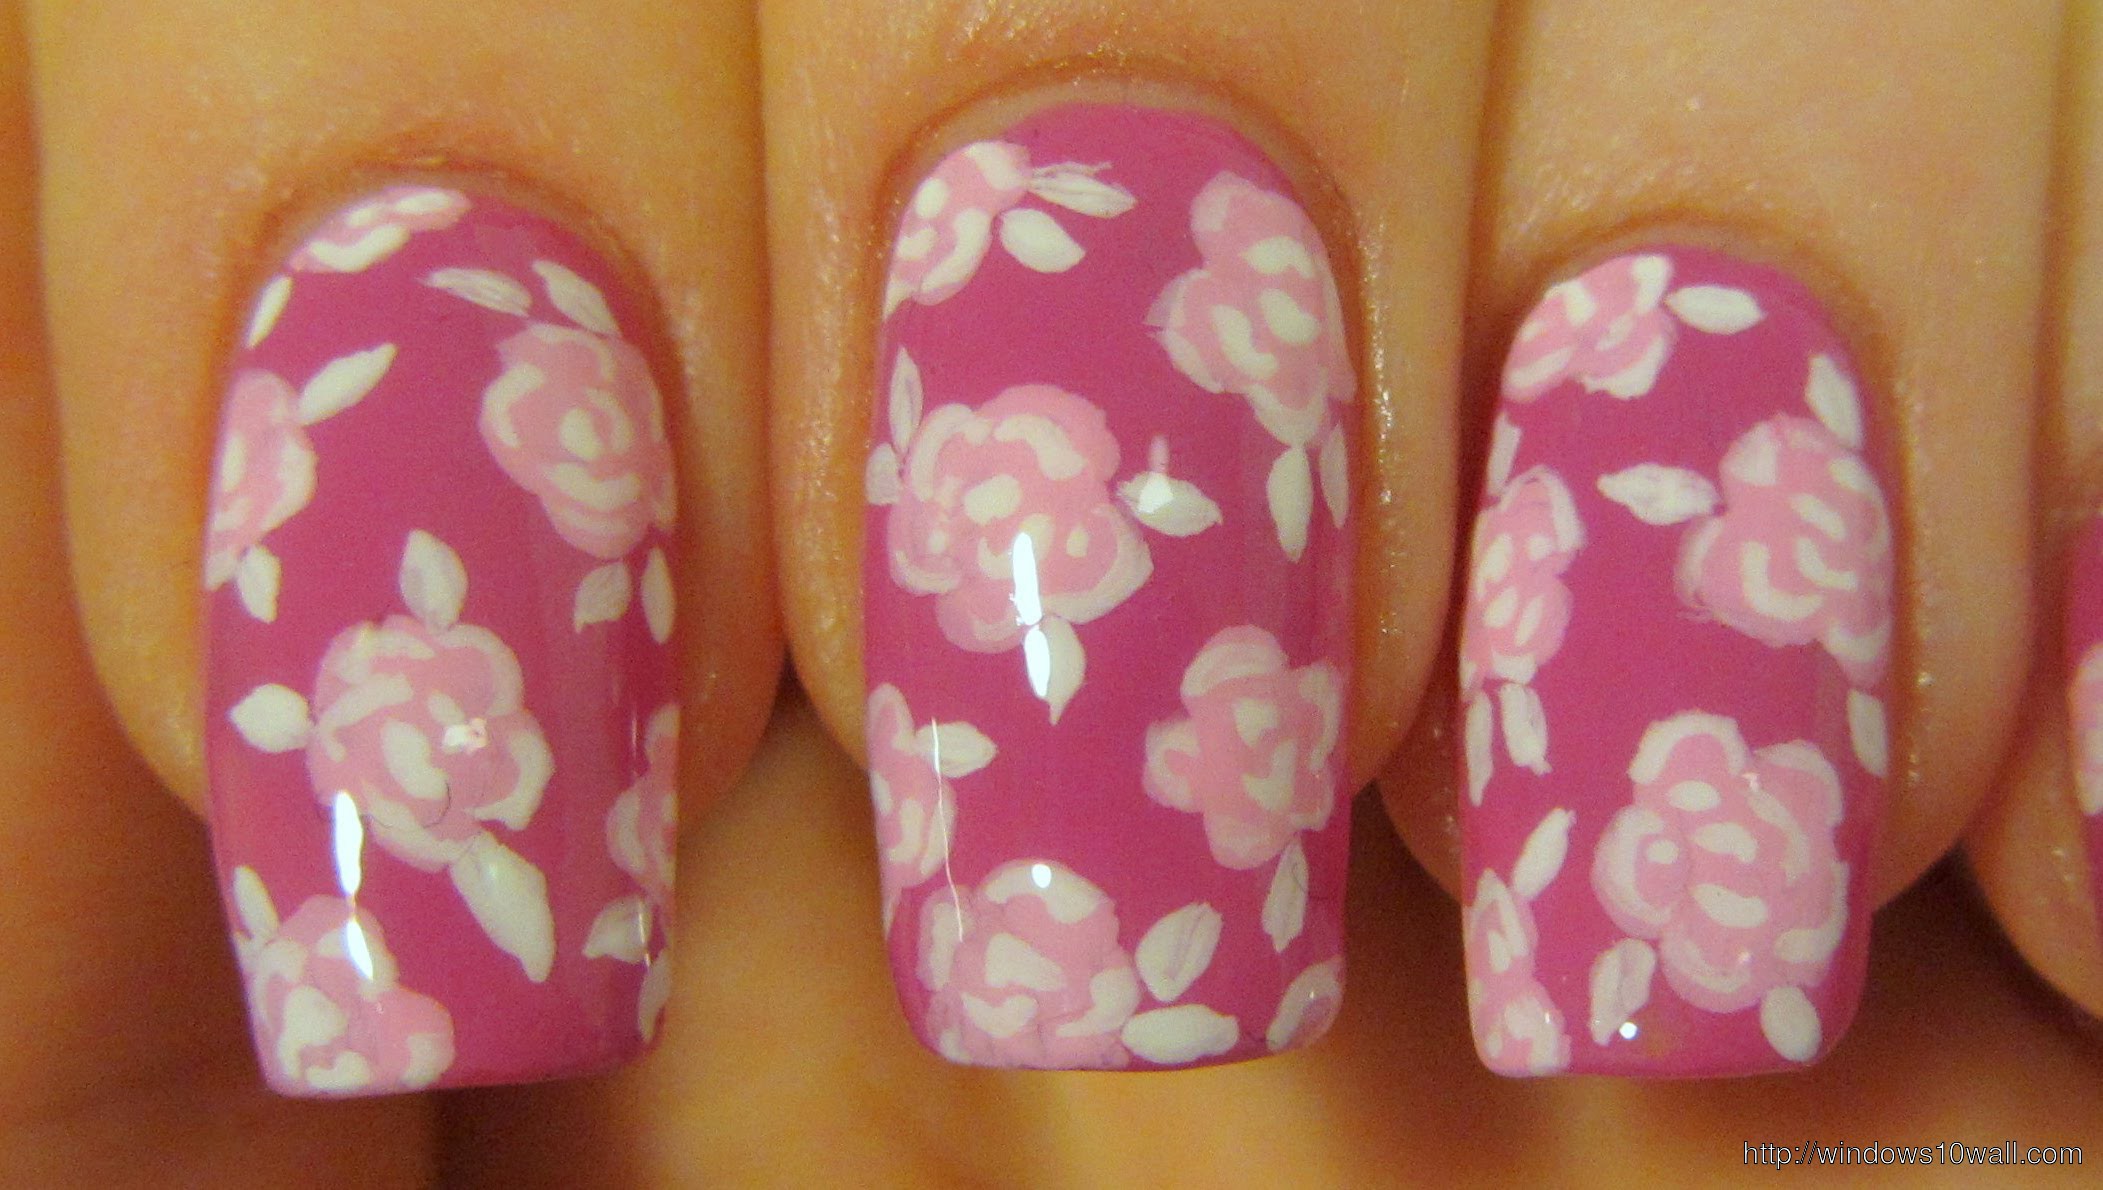 pink-nail-art-designs-with-flowers-background-wallpaper